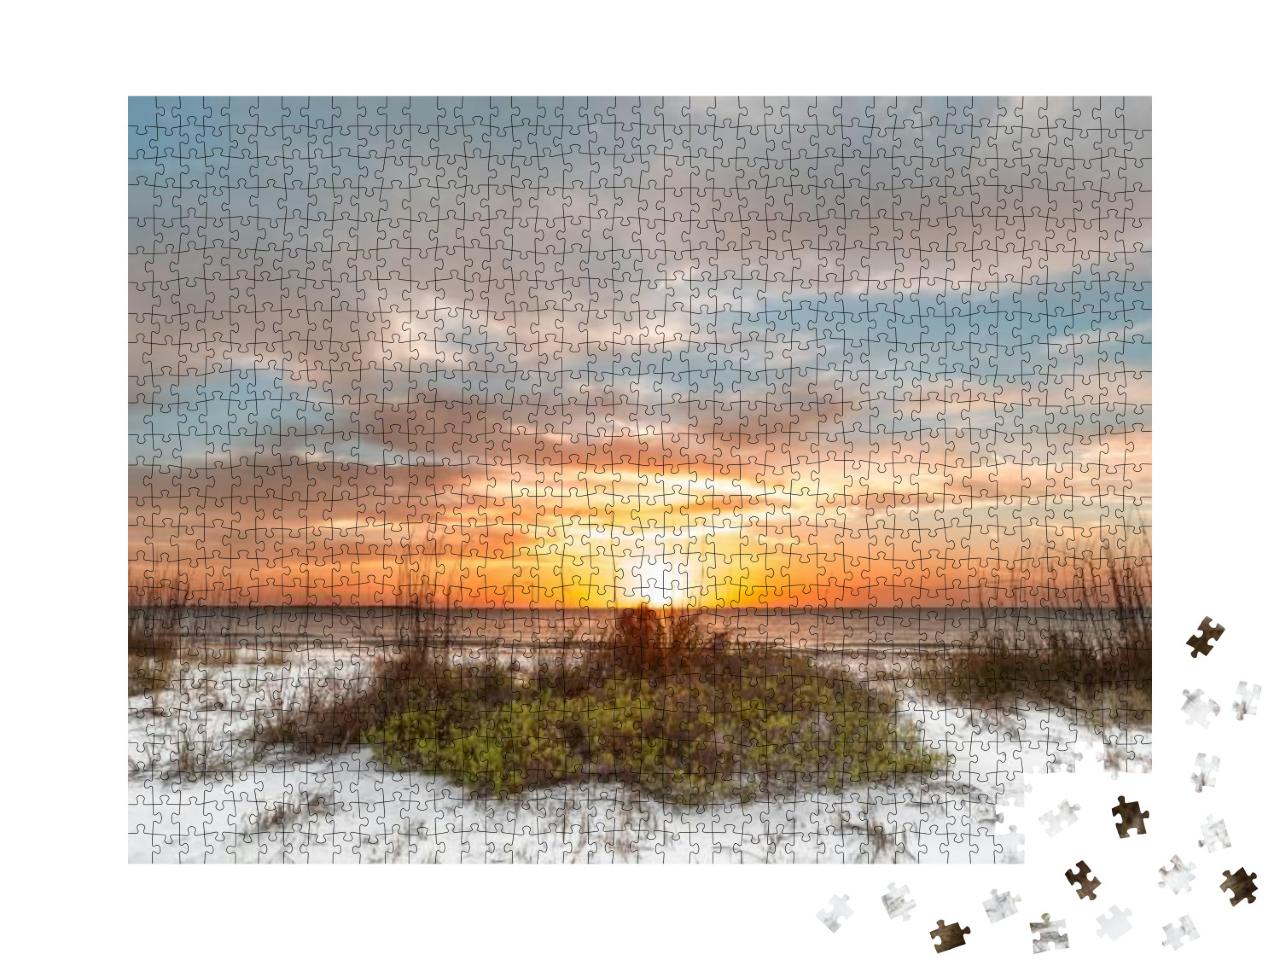 White Sand Beach At Sunset At Fort Desoto Park in Saint P... Jigsaw Puzzle with 1000 pieces